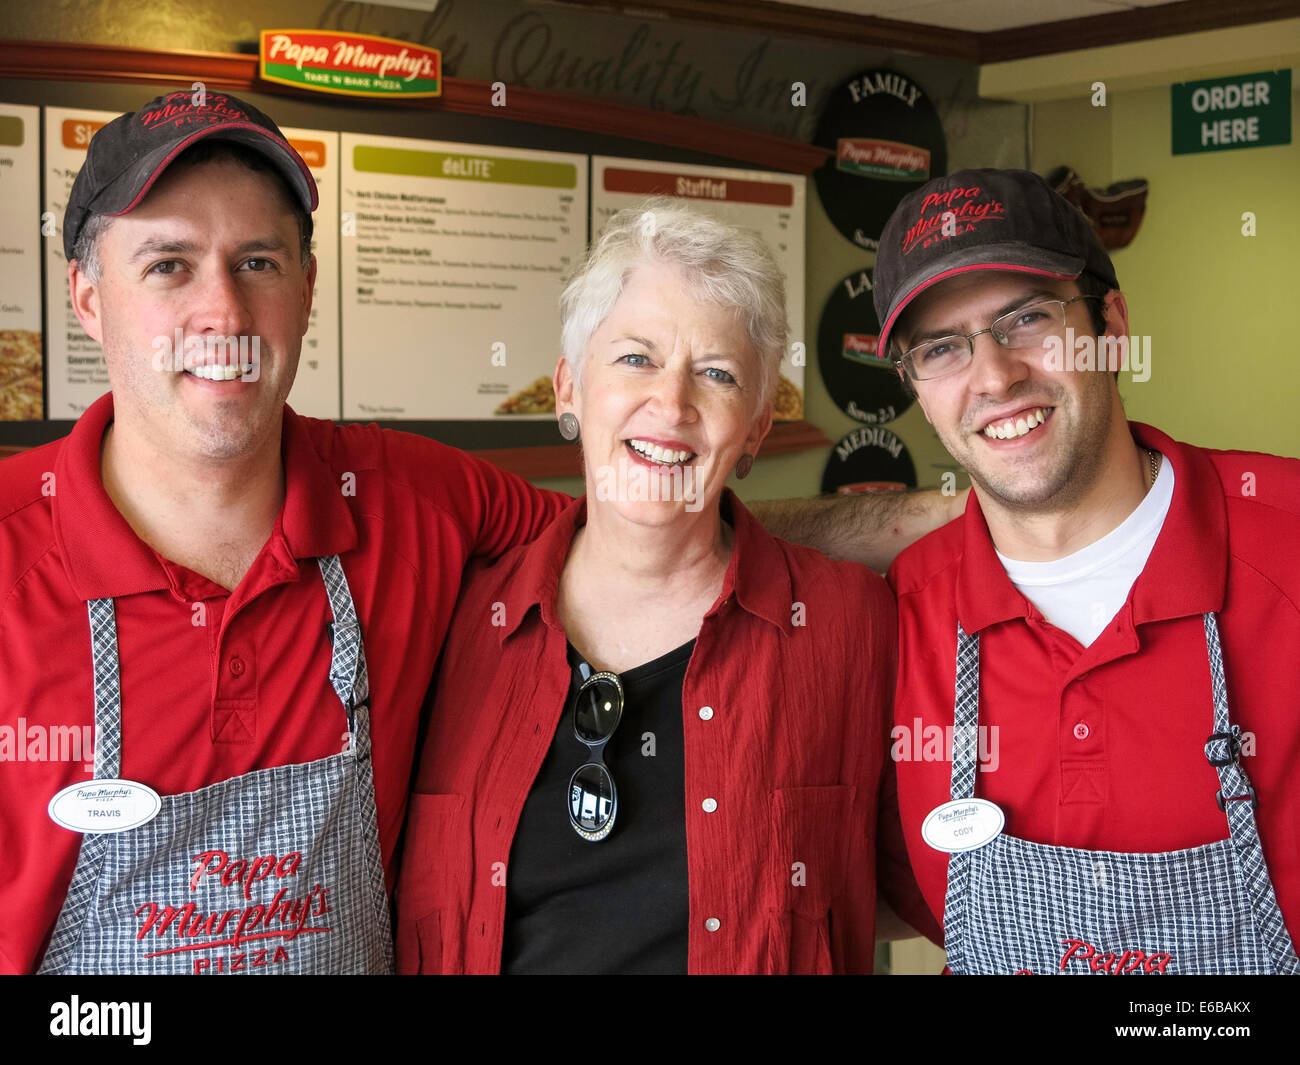 Satisfied Customer with Small Business Owners of Pizza Shop, USA Stock Photo